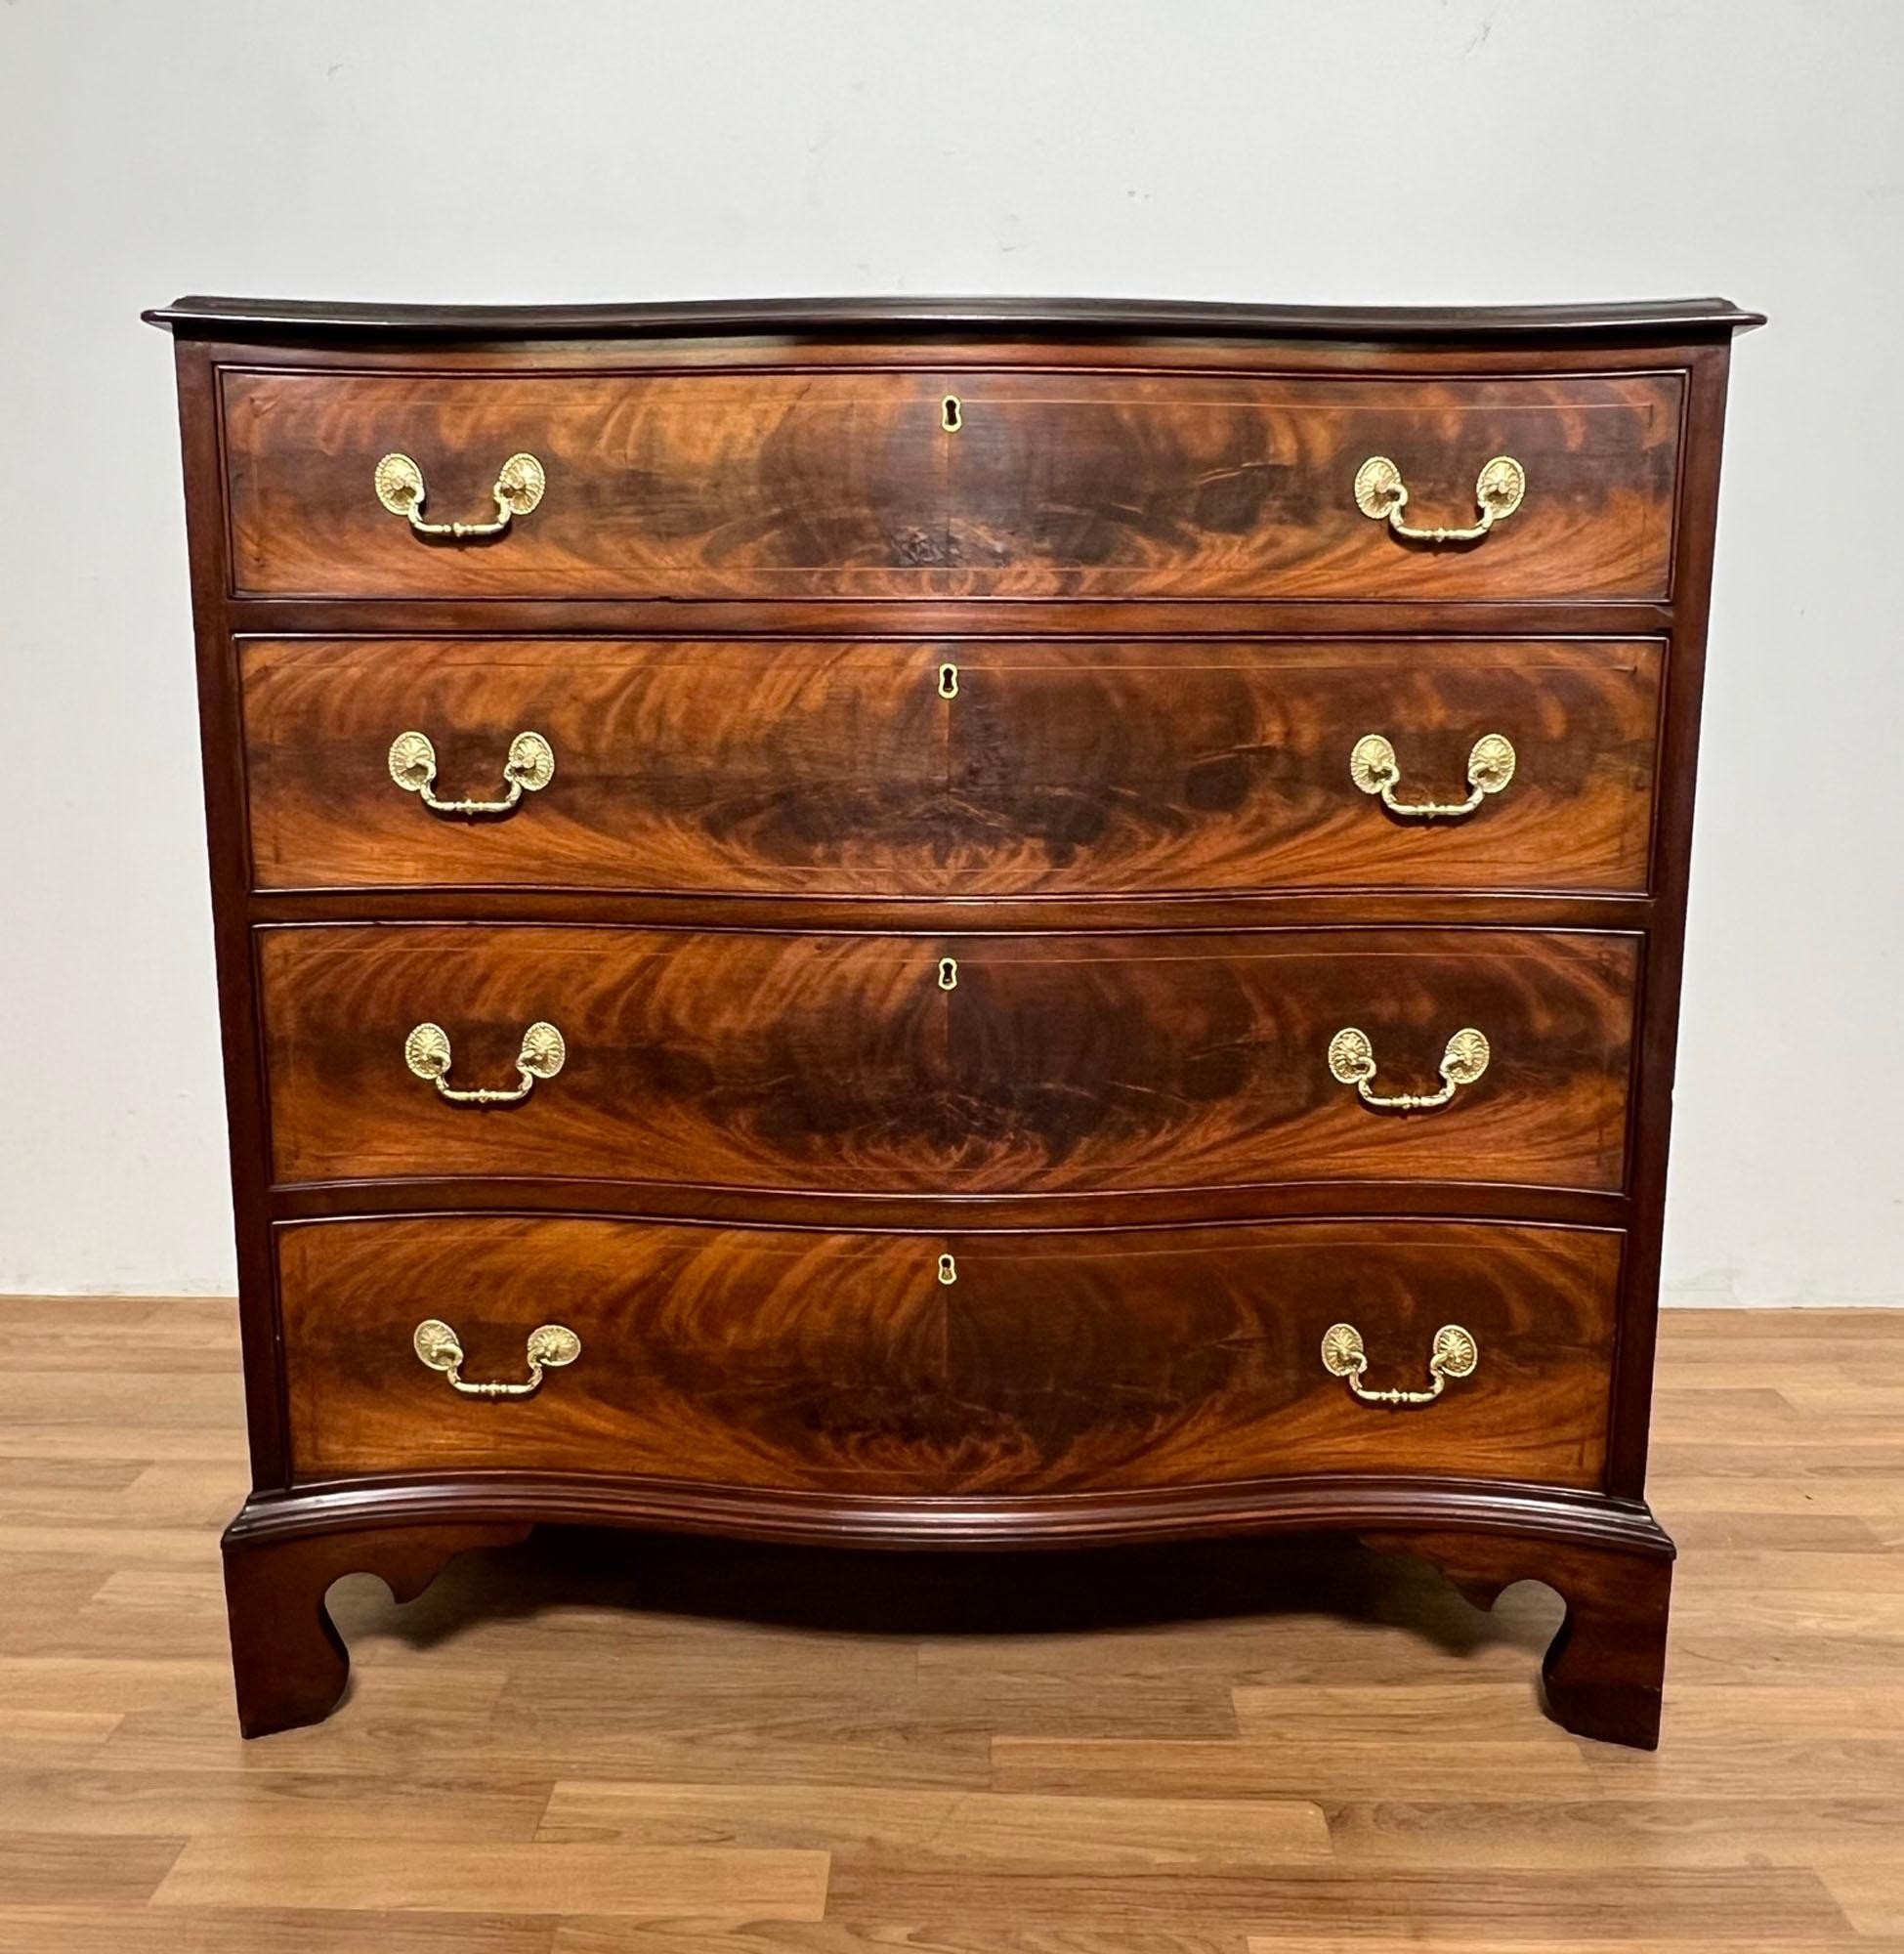 A fine antique George III serpentine chest, ca. 1790, with flamed mahogany drawers over bracket feet. Original brasses recently polished but remain unlacquered so will patinate naturally.